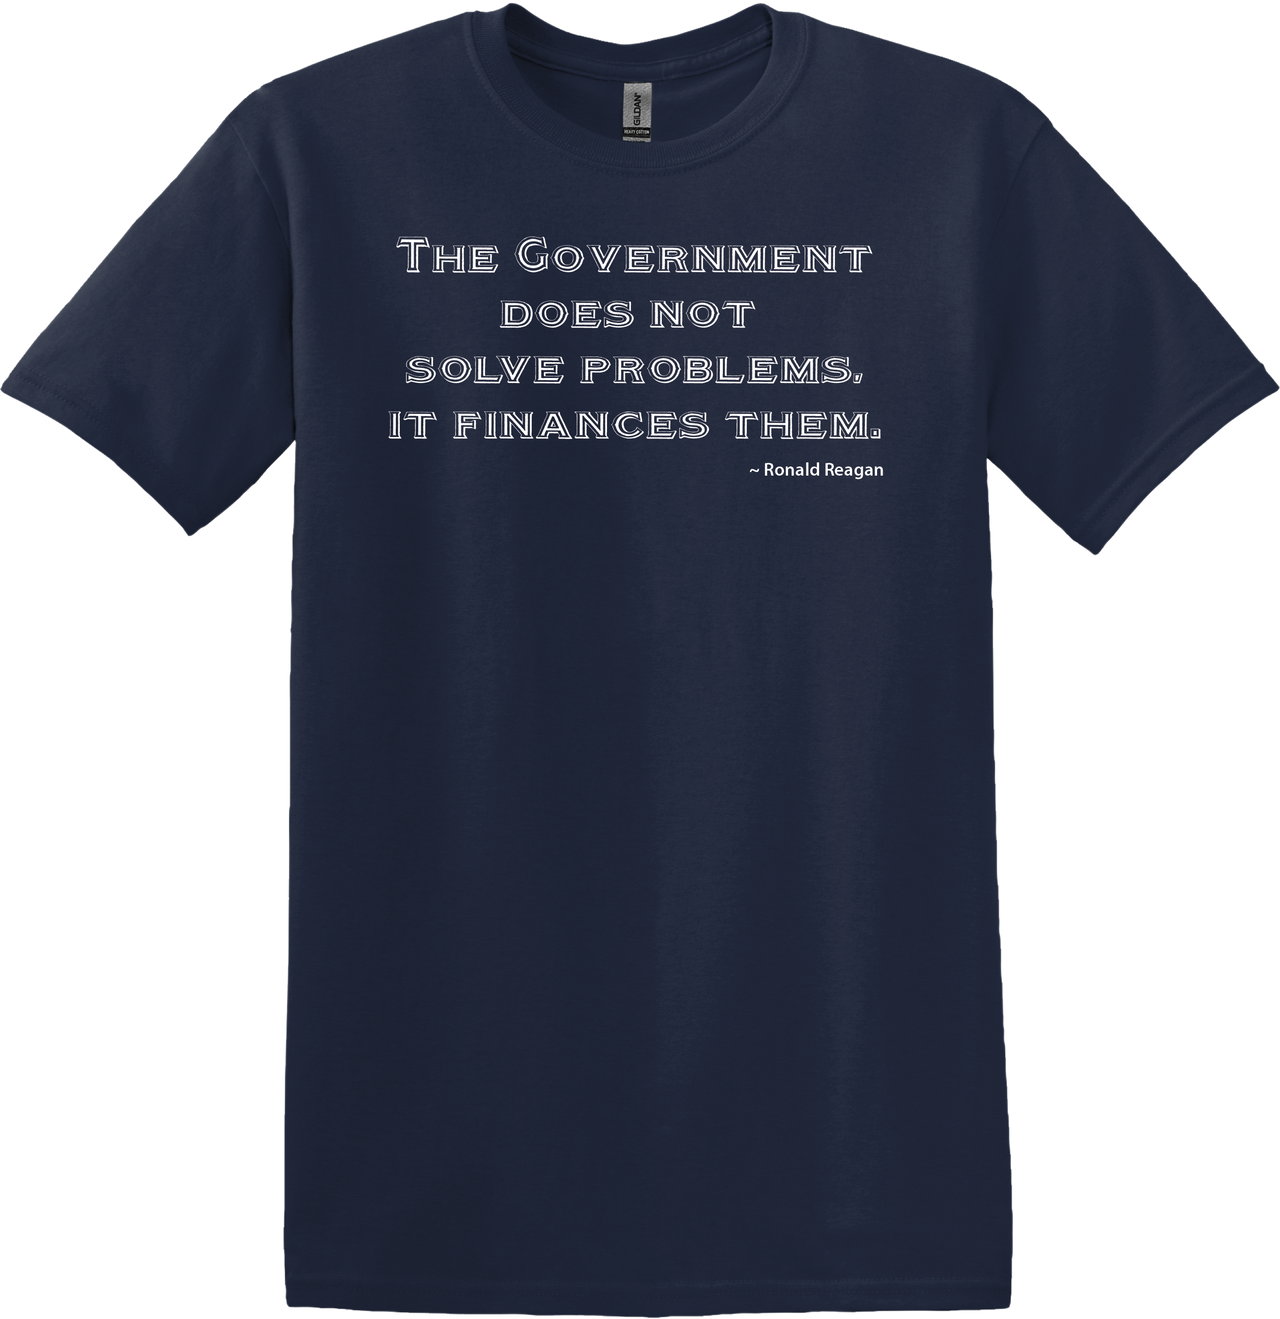 The Government Does Not Solve Problems, it Finances Them on Black T-Shirt